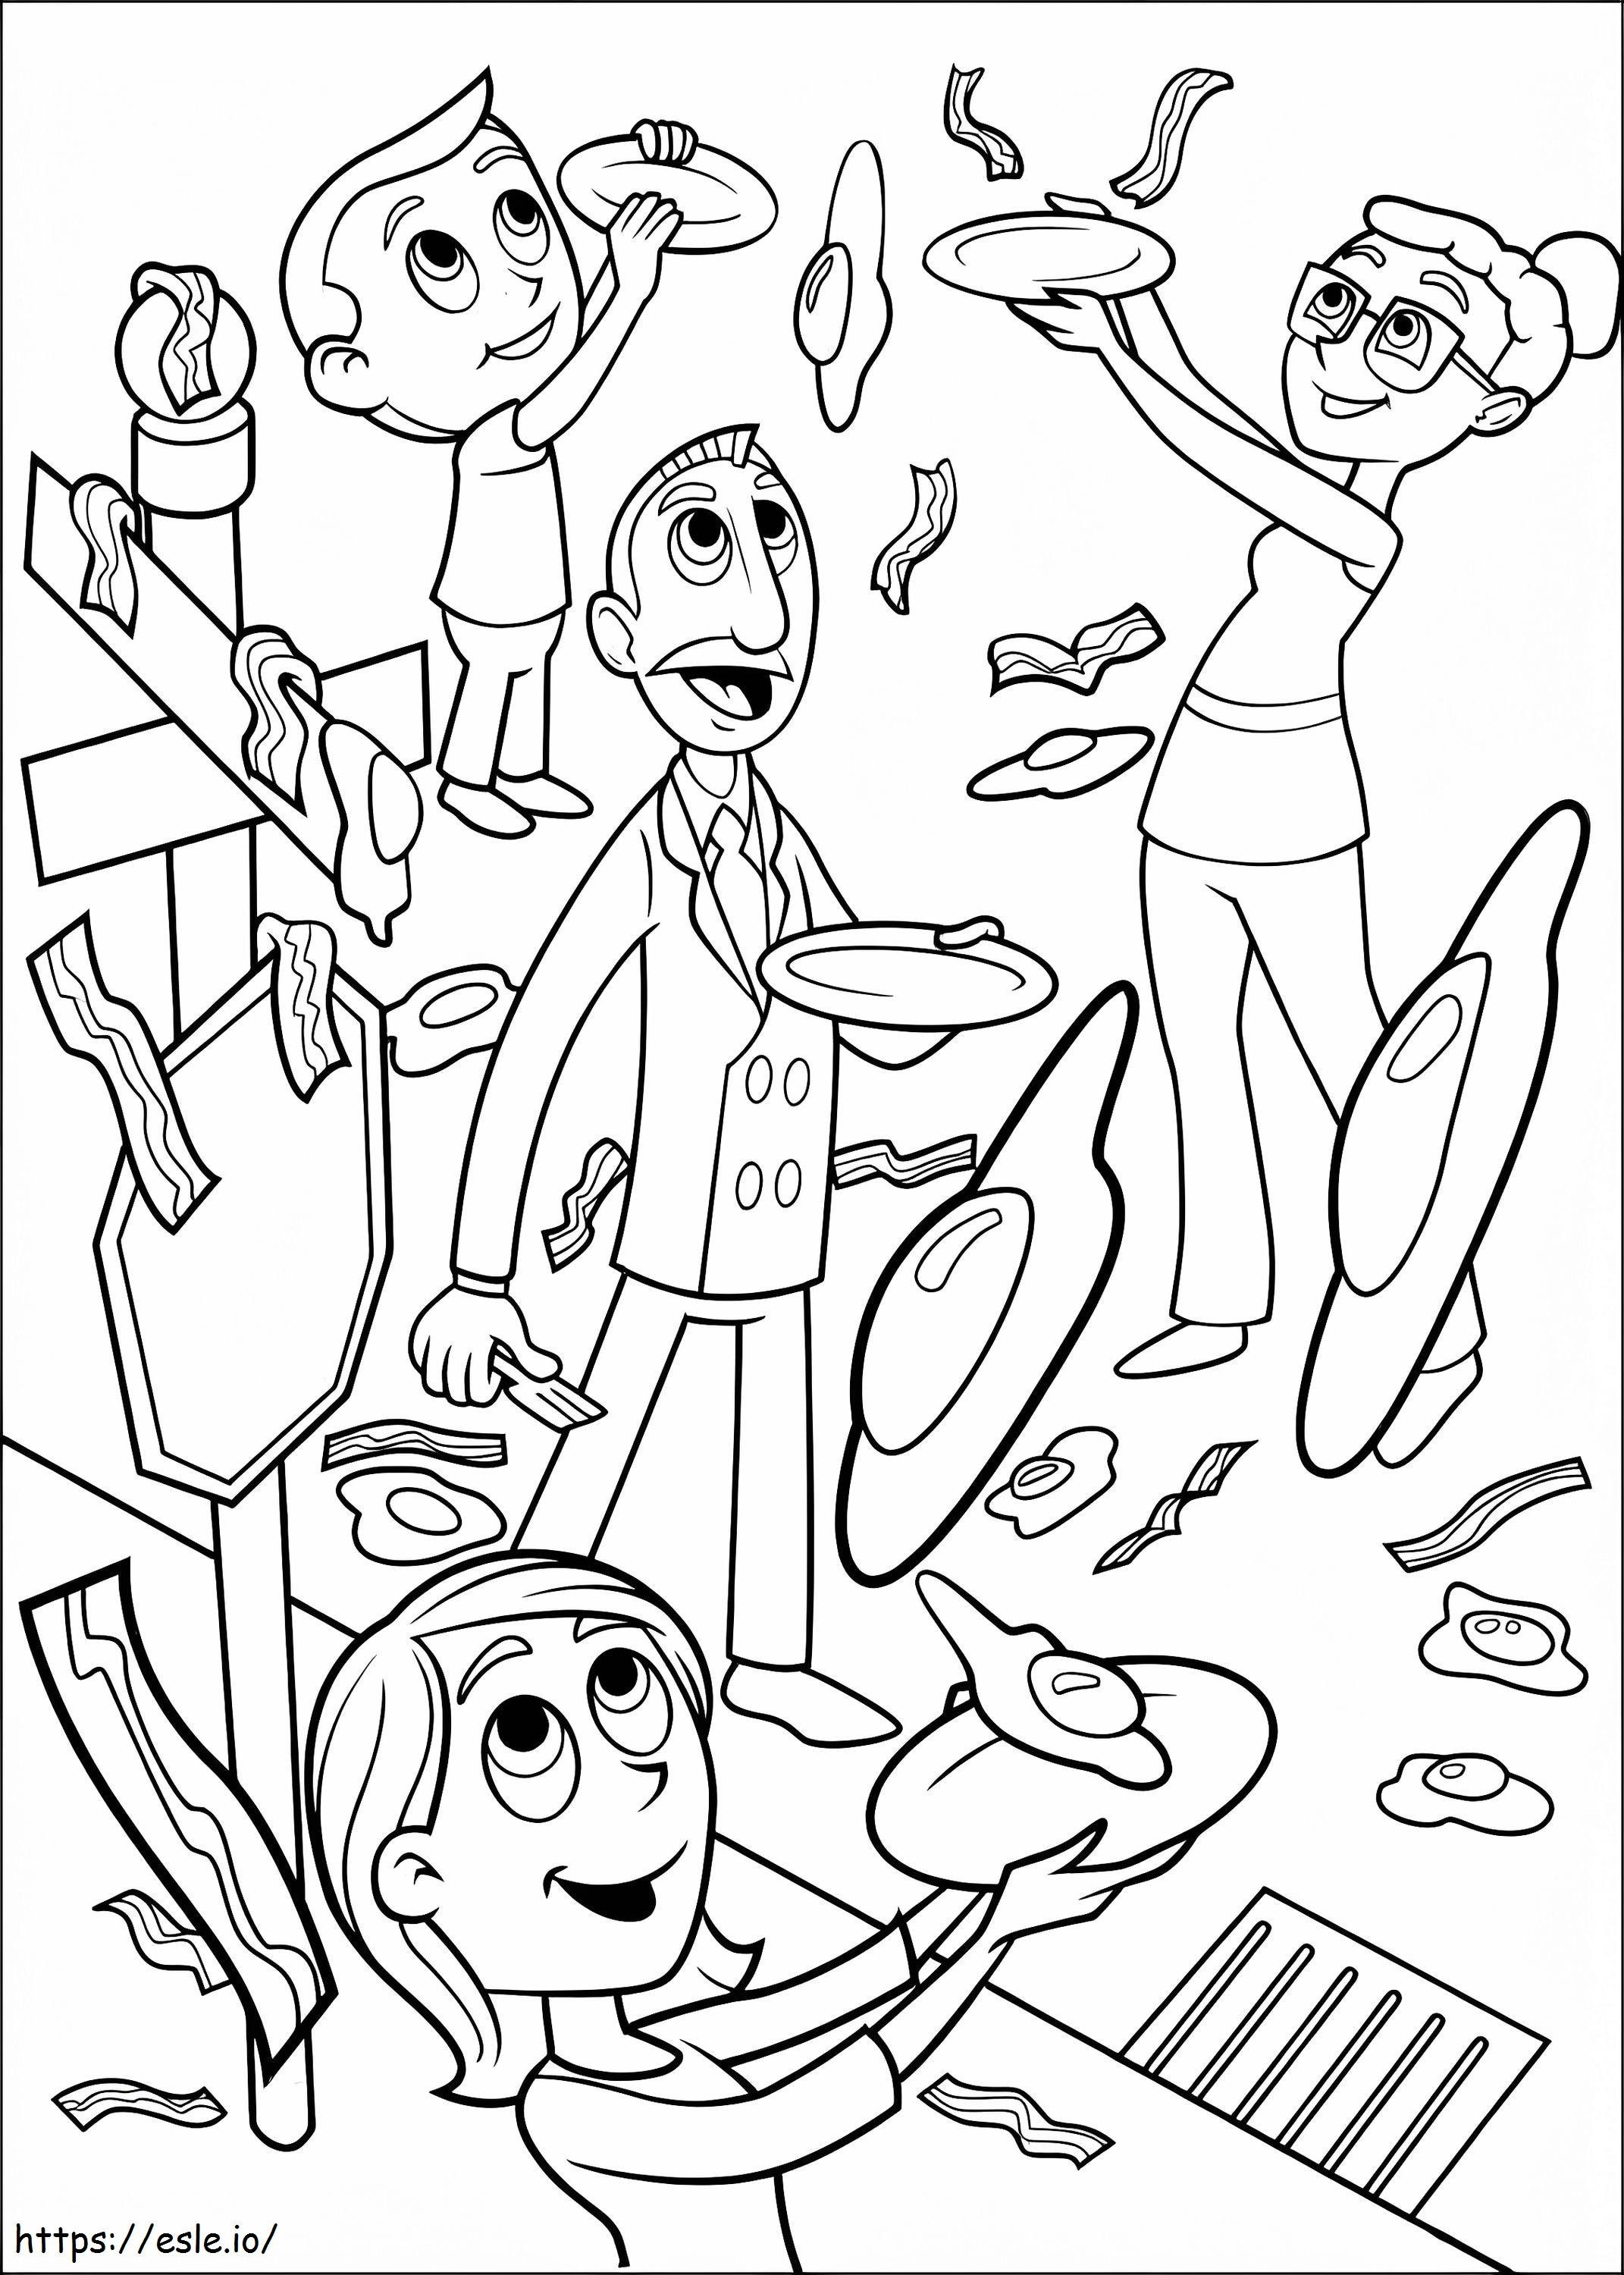 Cloudy With A Chance Of Meatballs 8 coloring page